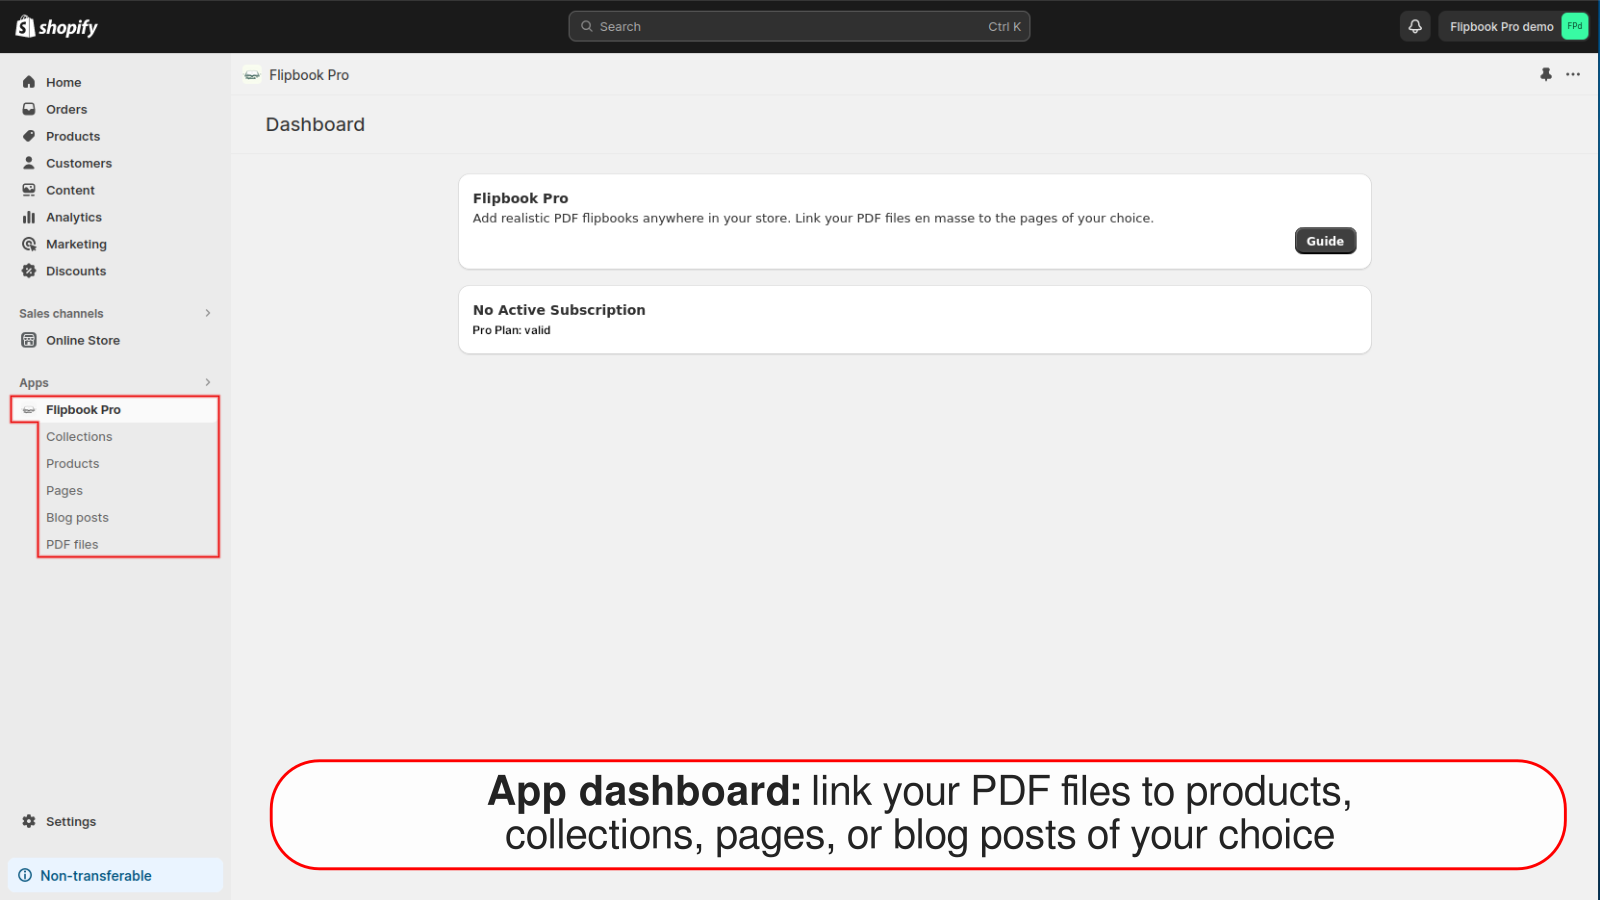 App dashboard: link PDF to products, collections, pages or blogs